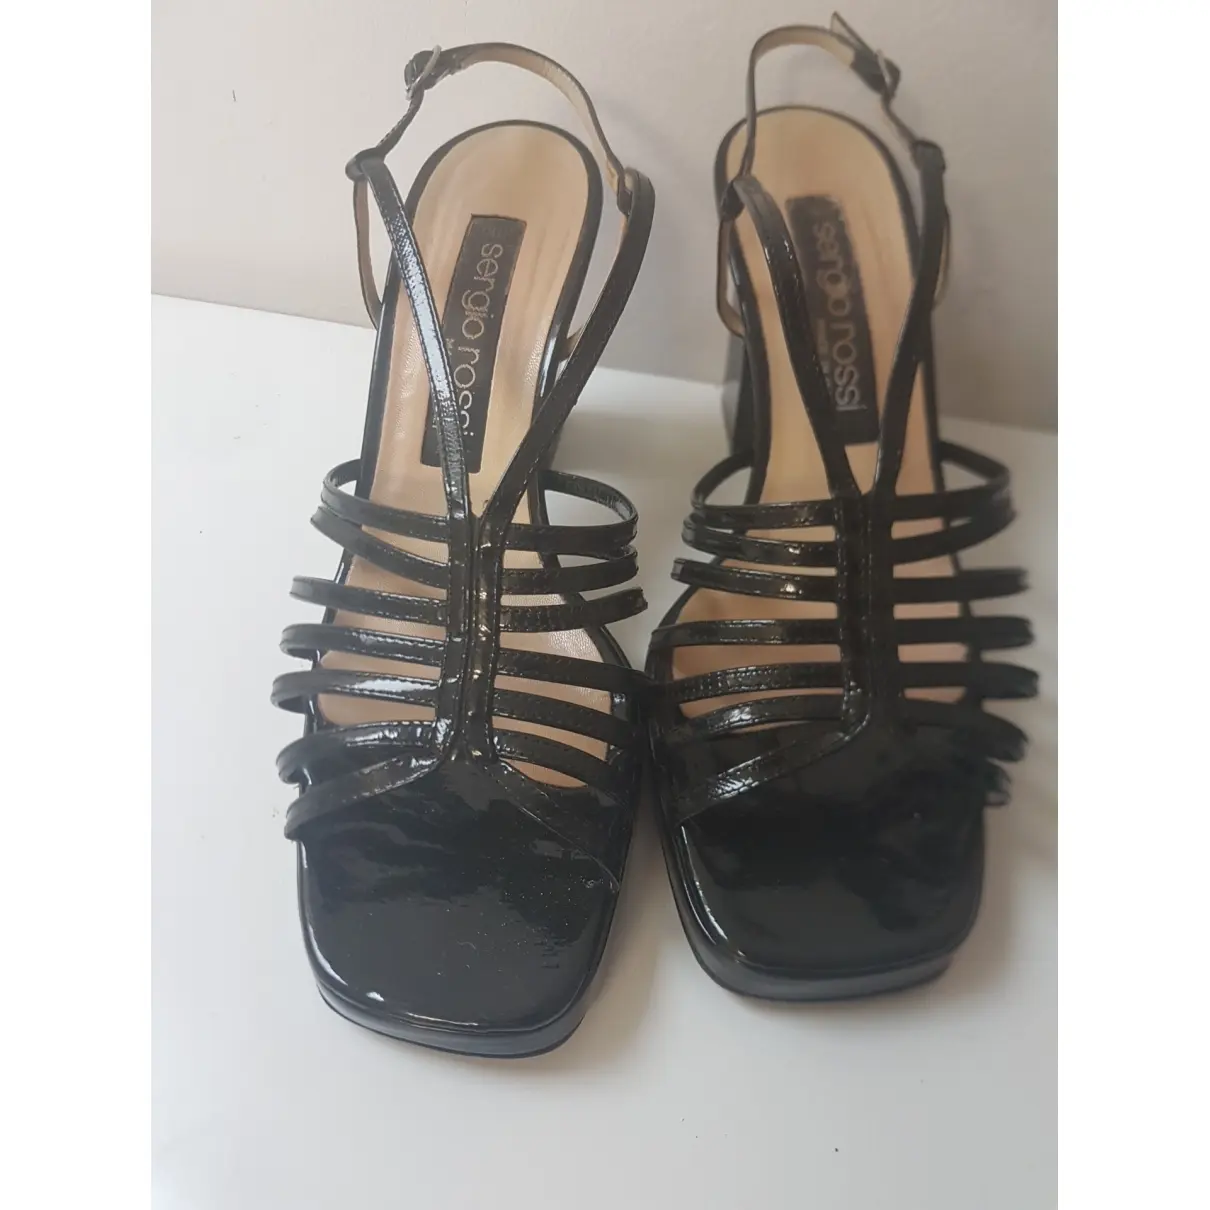 Sergio Rossi Patent leather mules for sale - Vintage